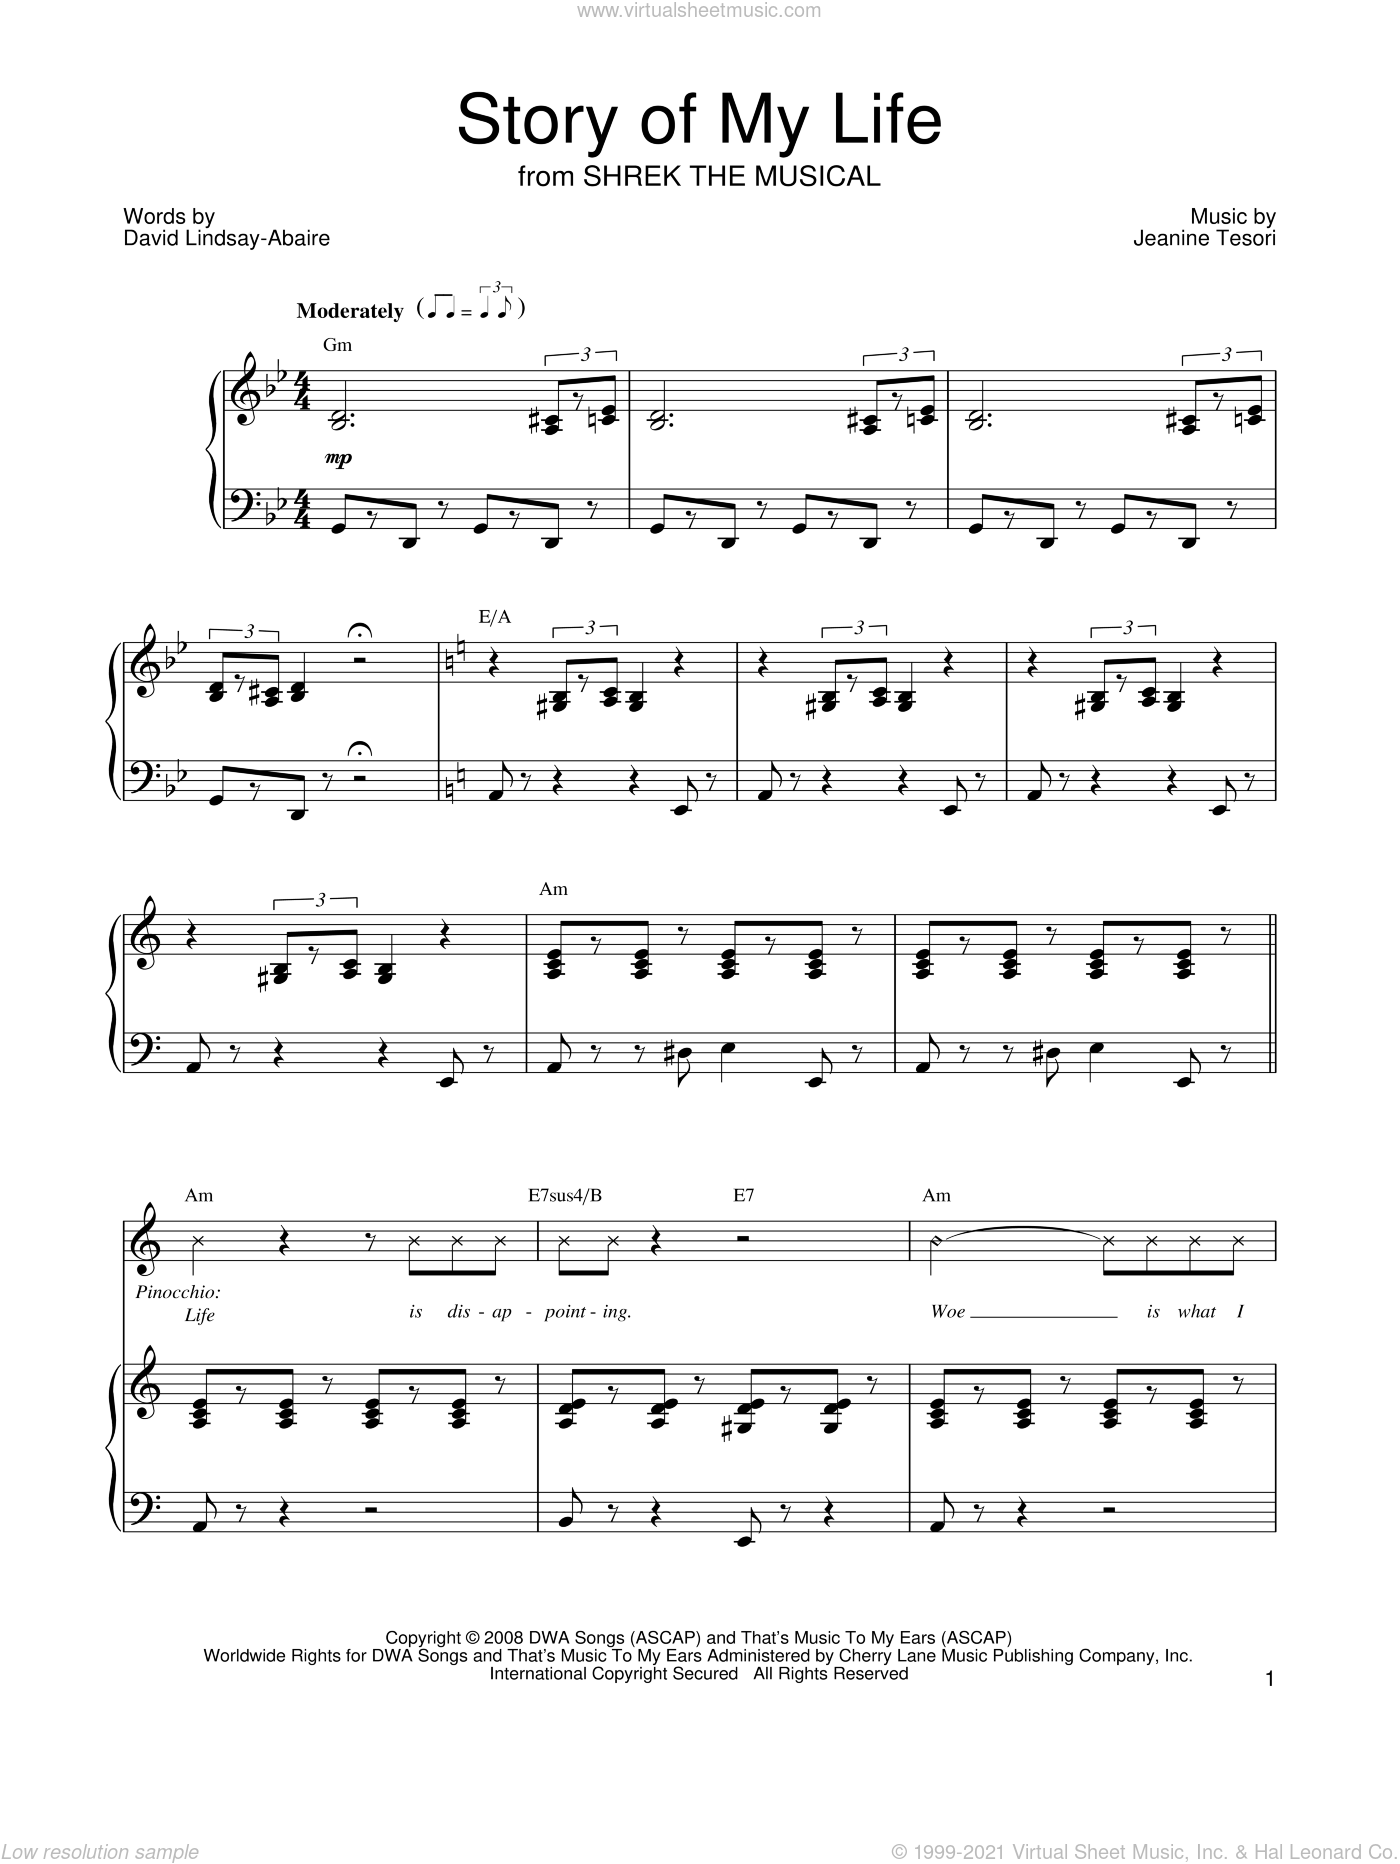 Print and Download Story Of My Life Sheet Music; Sheet Music - Download &  Print Story Of My Life